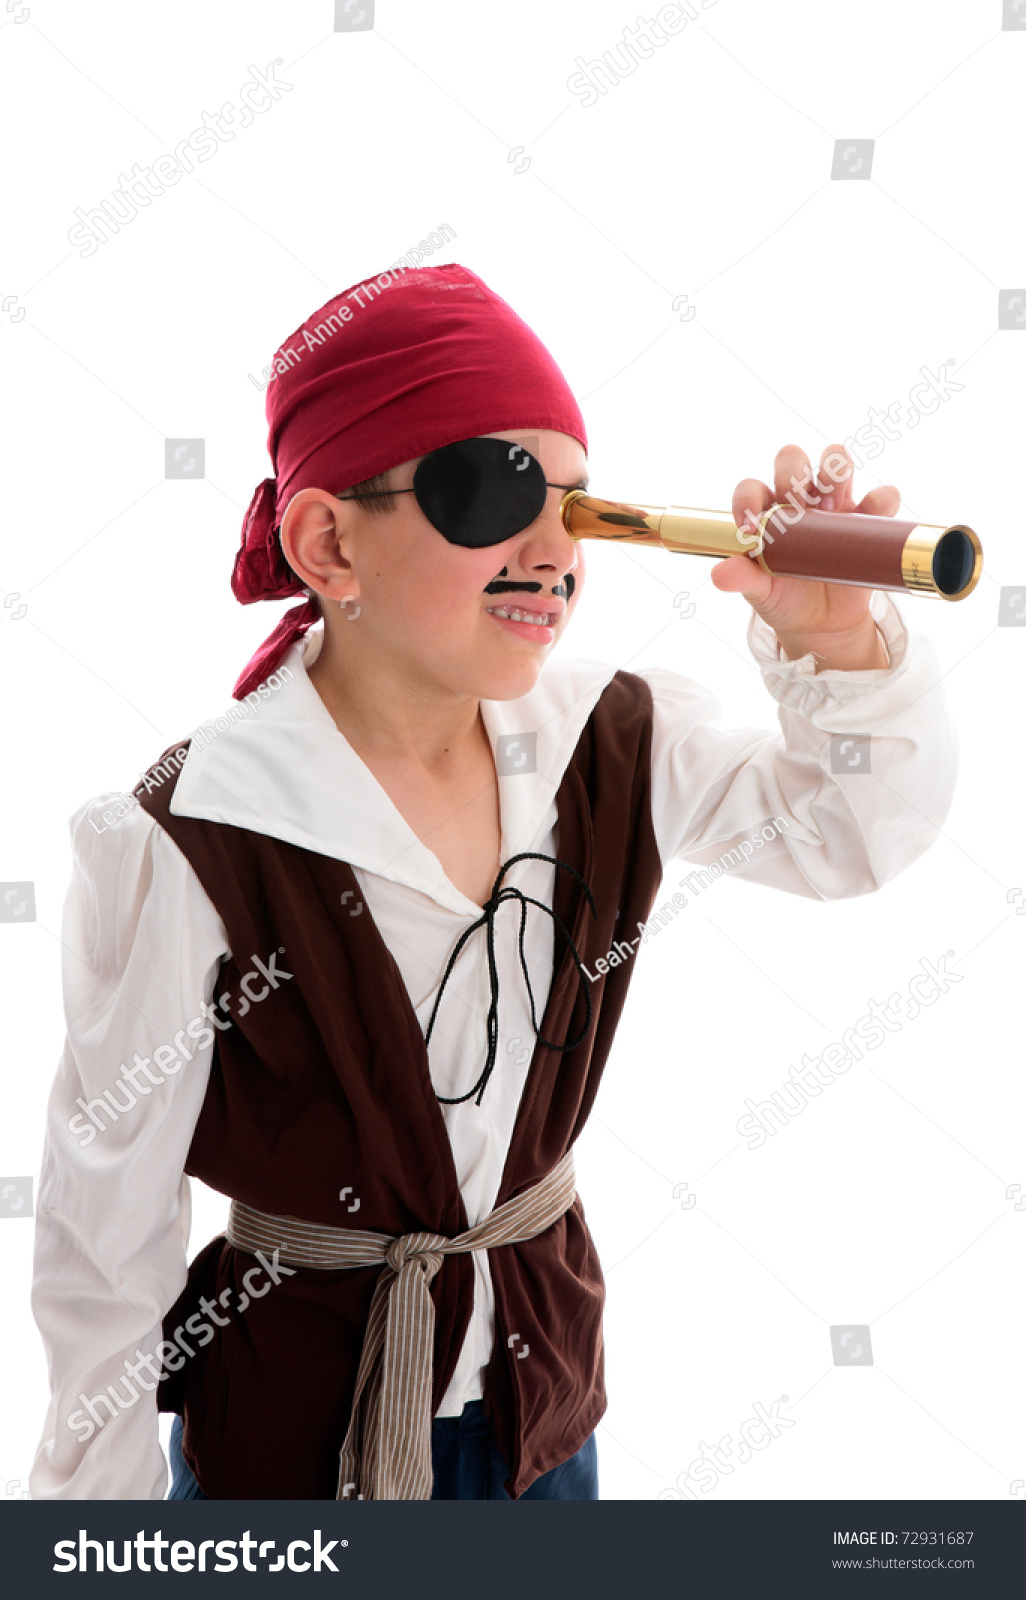 A young boy pirate looking through a monoscope in search of treasure or ships to plunder.  White background. #72931687